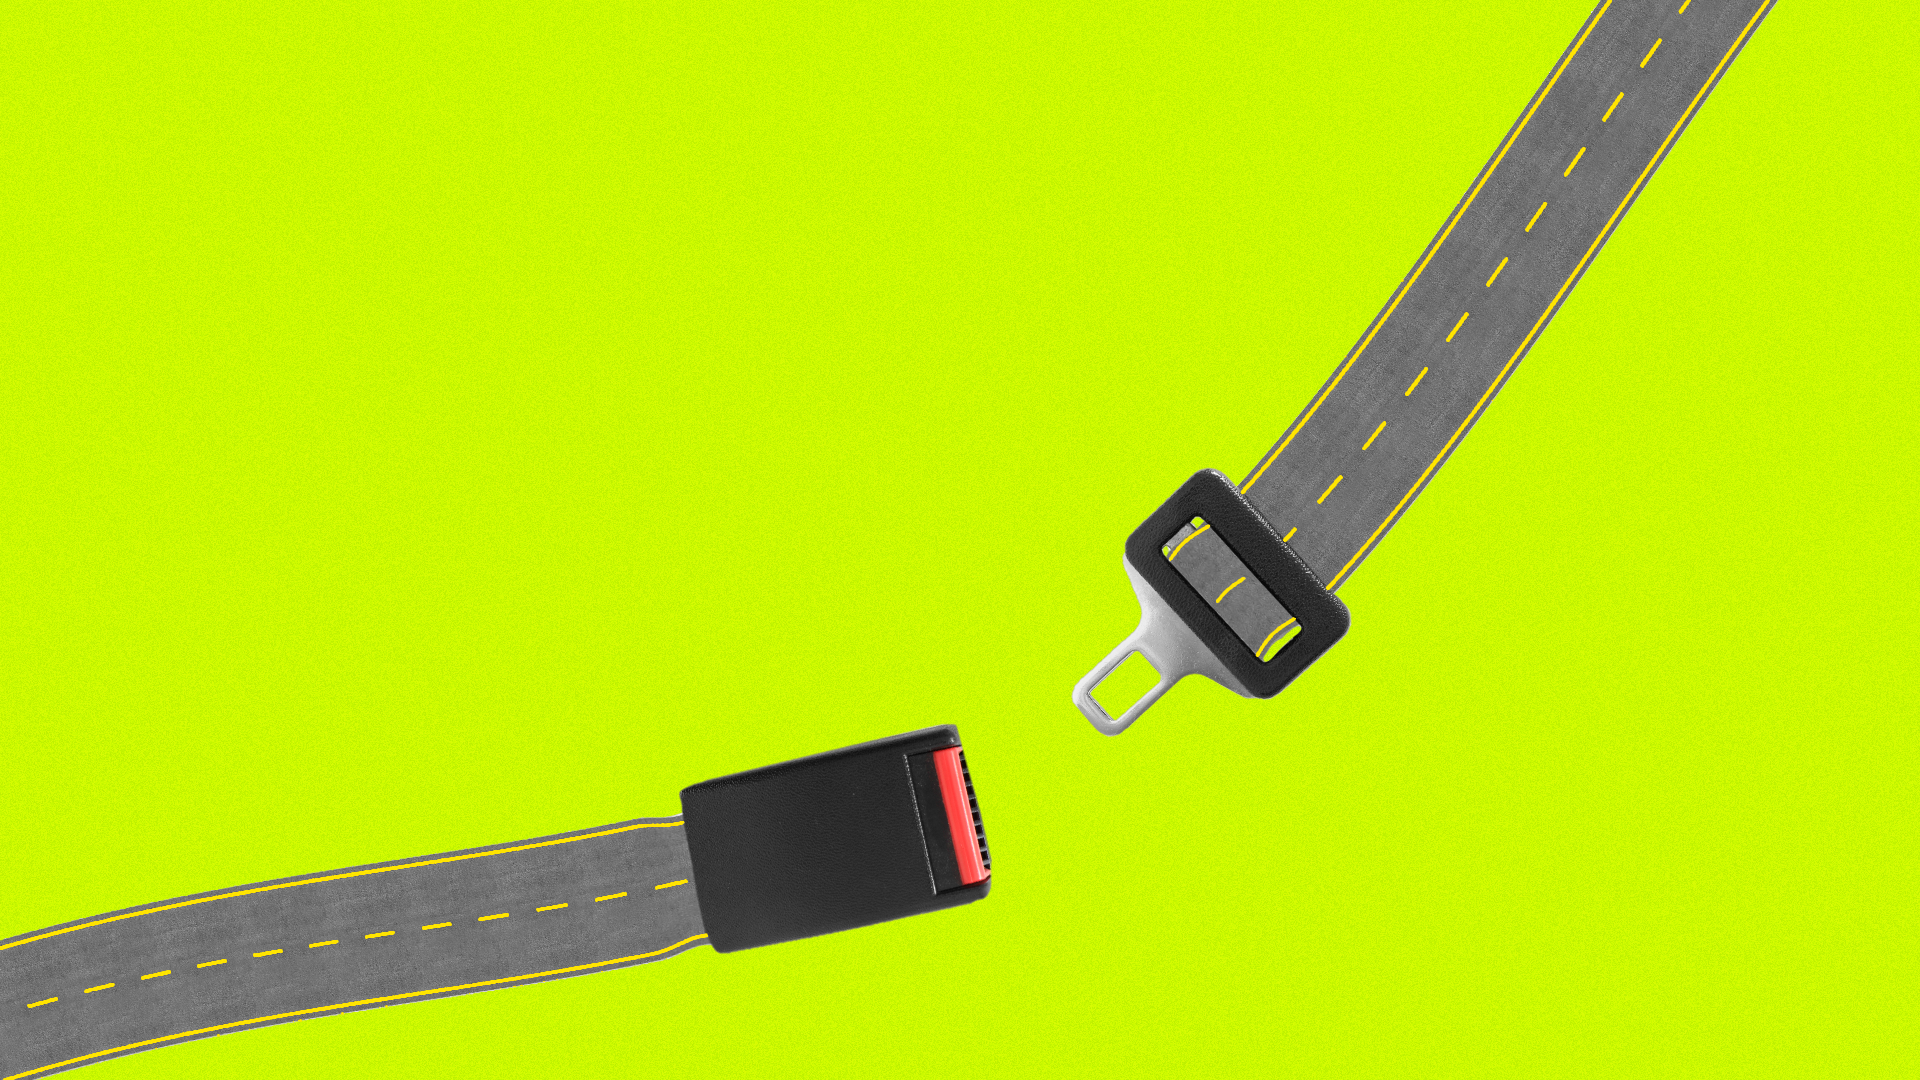 Illustration of an unfastened seat belt, with the belt replaced with a road